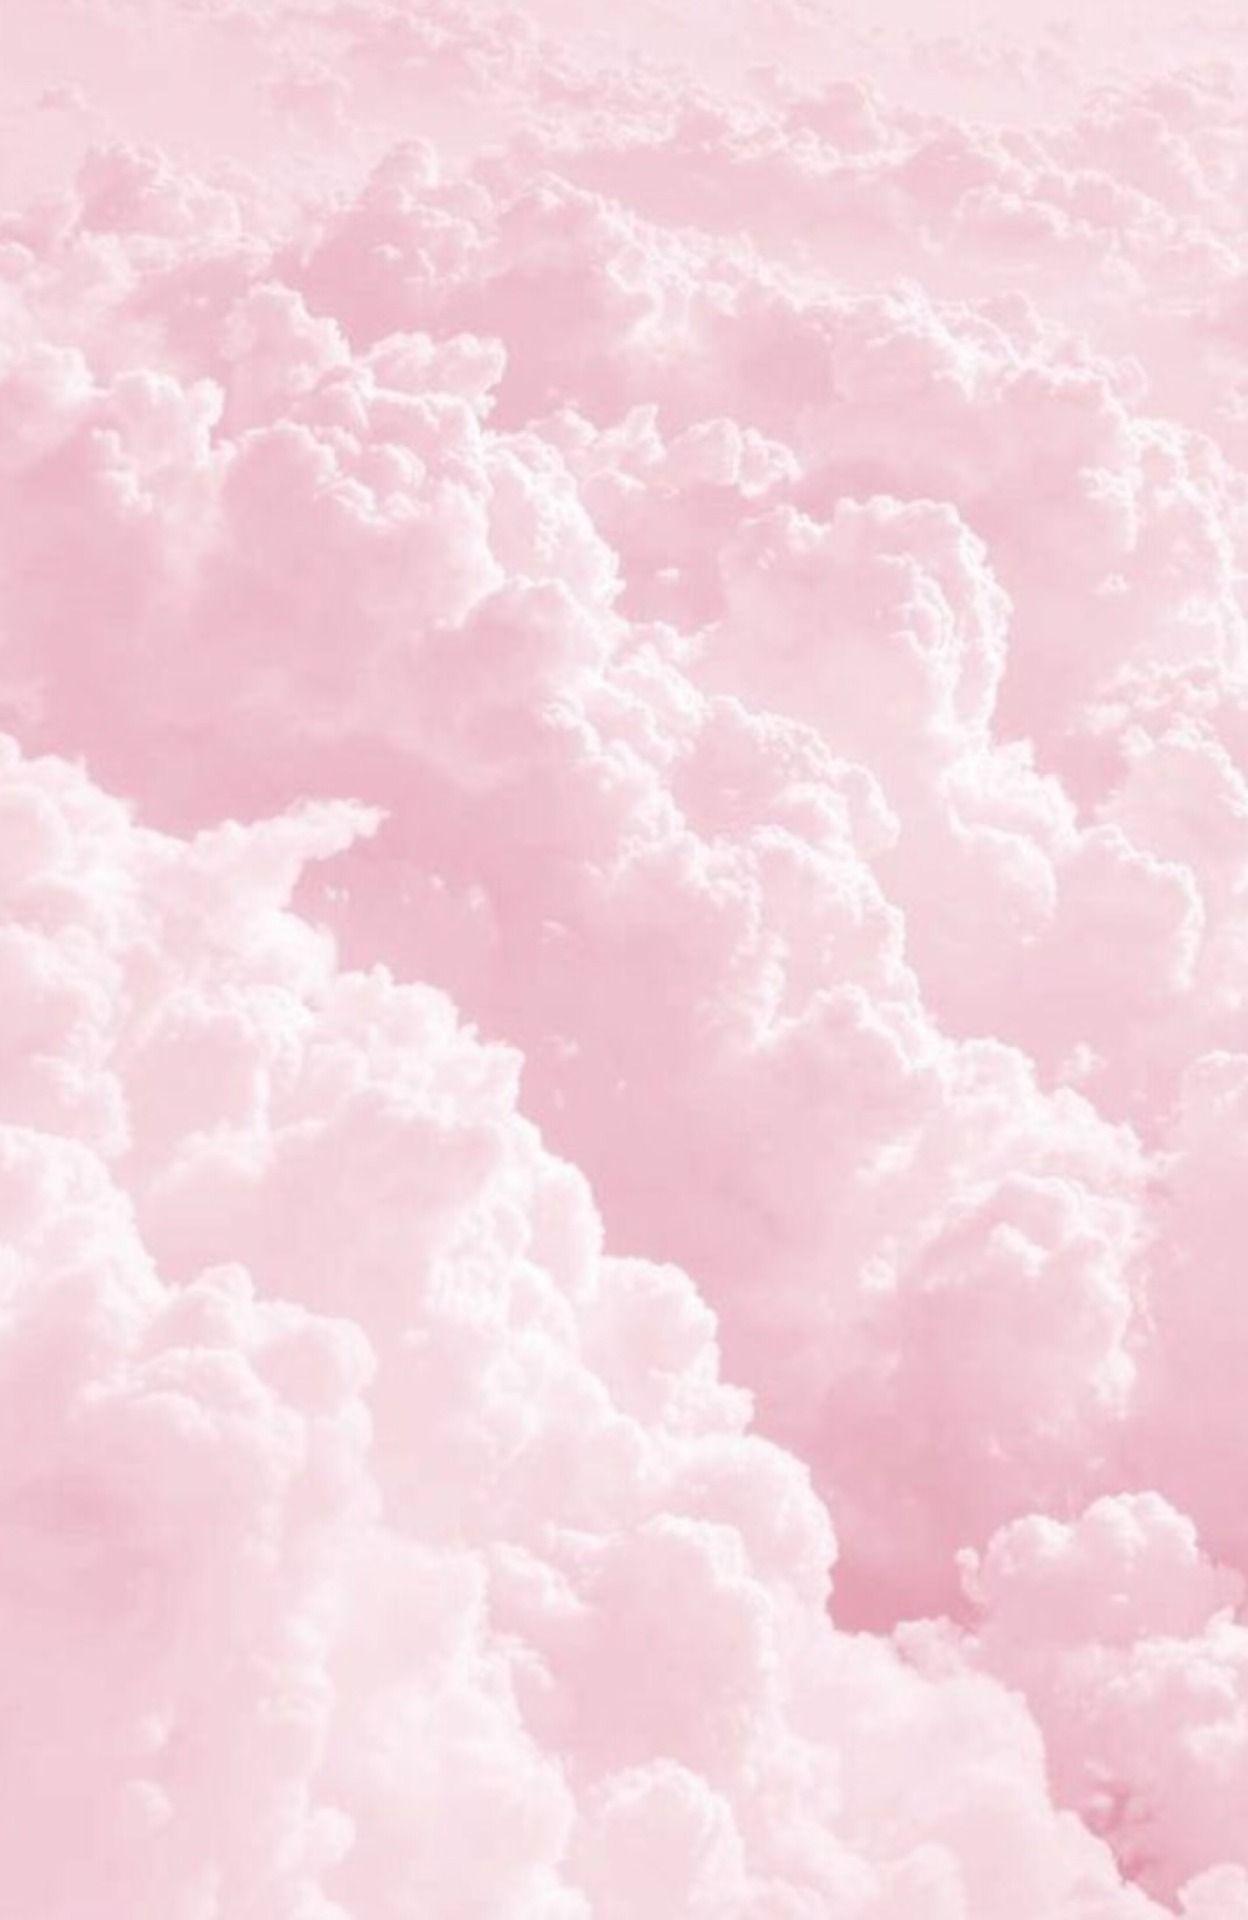 Pastel Pink iPhone Wallpaper  The Best Wallpaper Ideas Thatll Make Your  Phone Look Aesthetically Pleasing  POPSUGAR Tech Photo 9